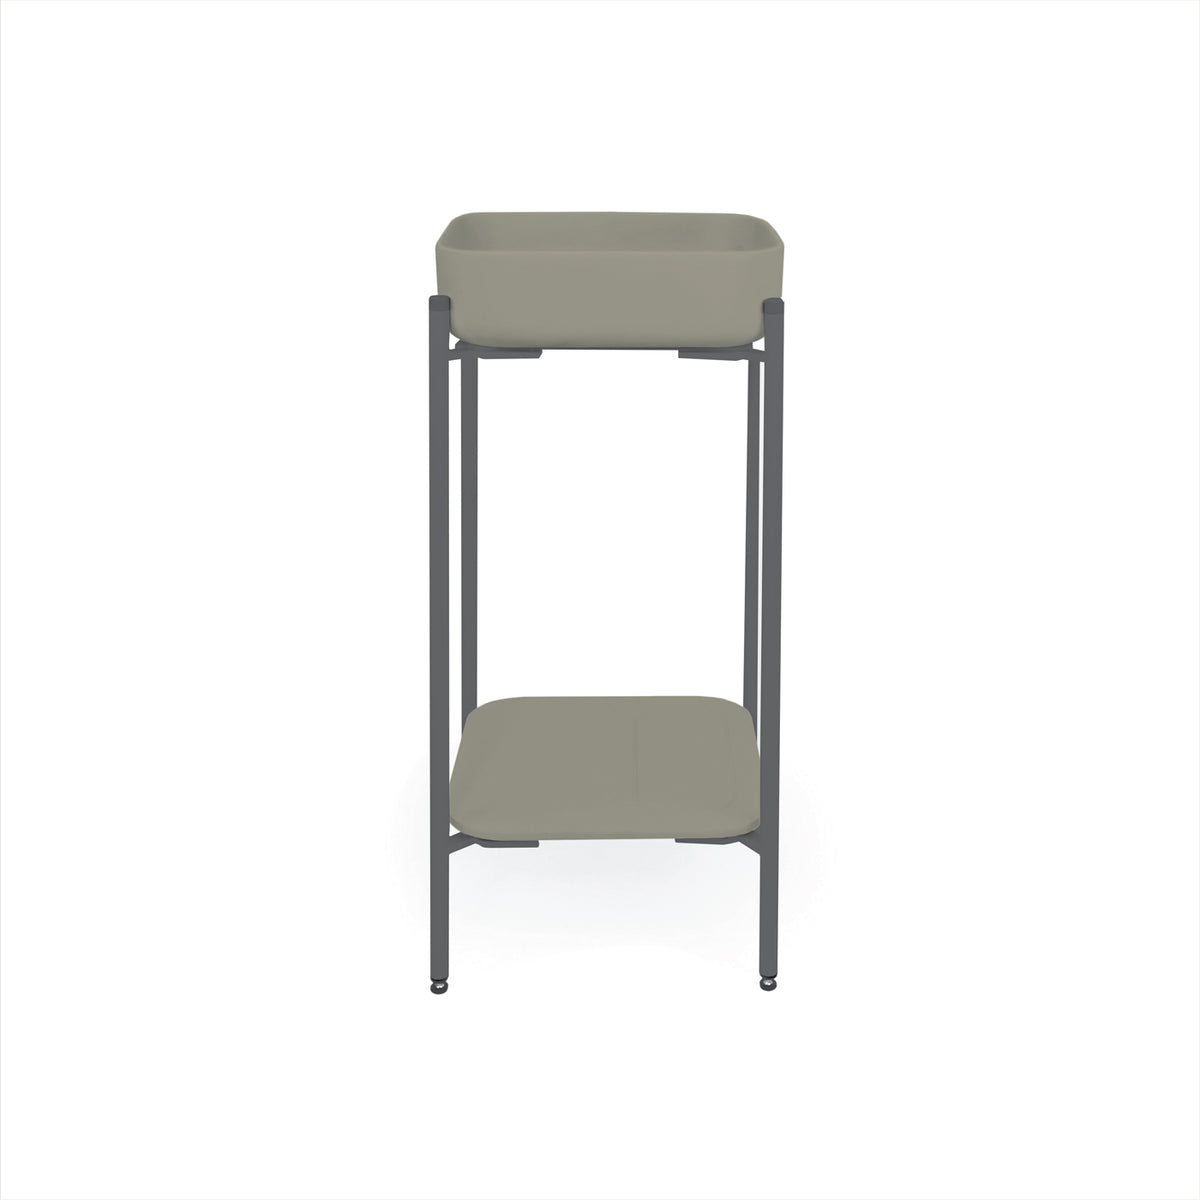 Cube Basin - Stand (Olive)